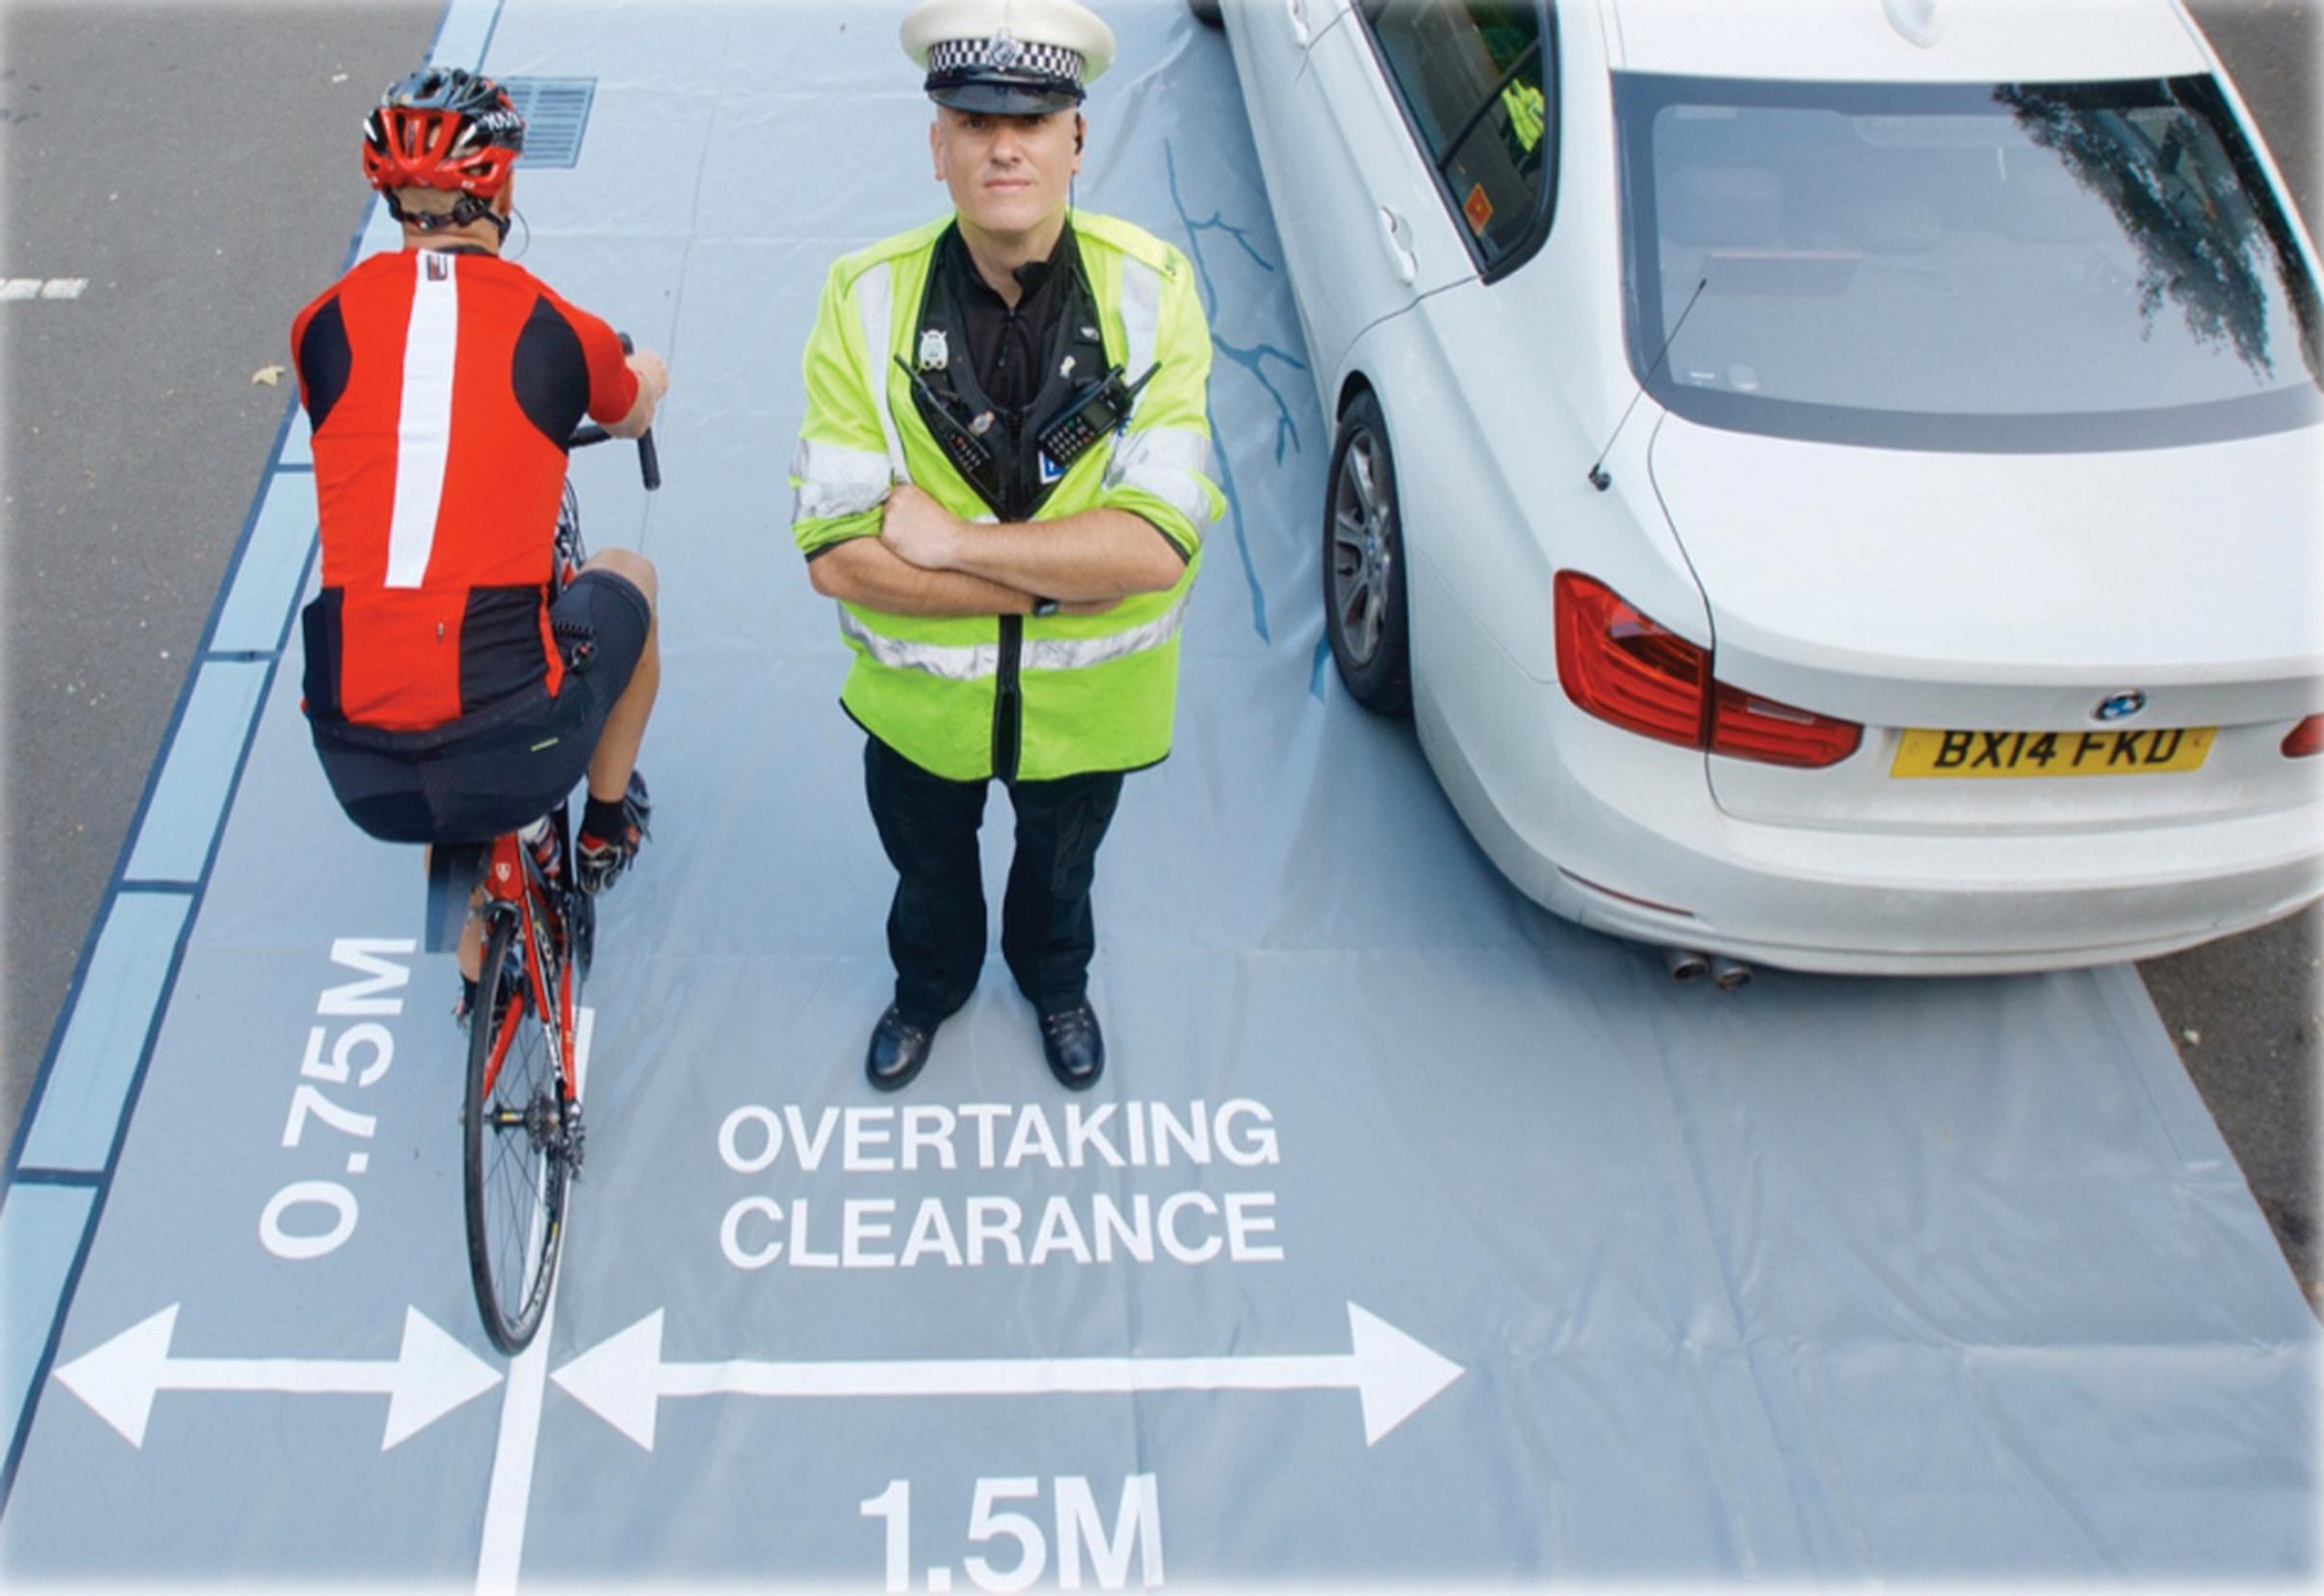 The ‘close pass’ mat shows drivers that they should leave a width of 1.5 metres when overtaking cyclists